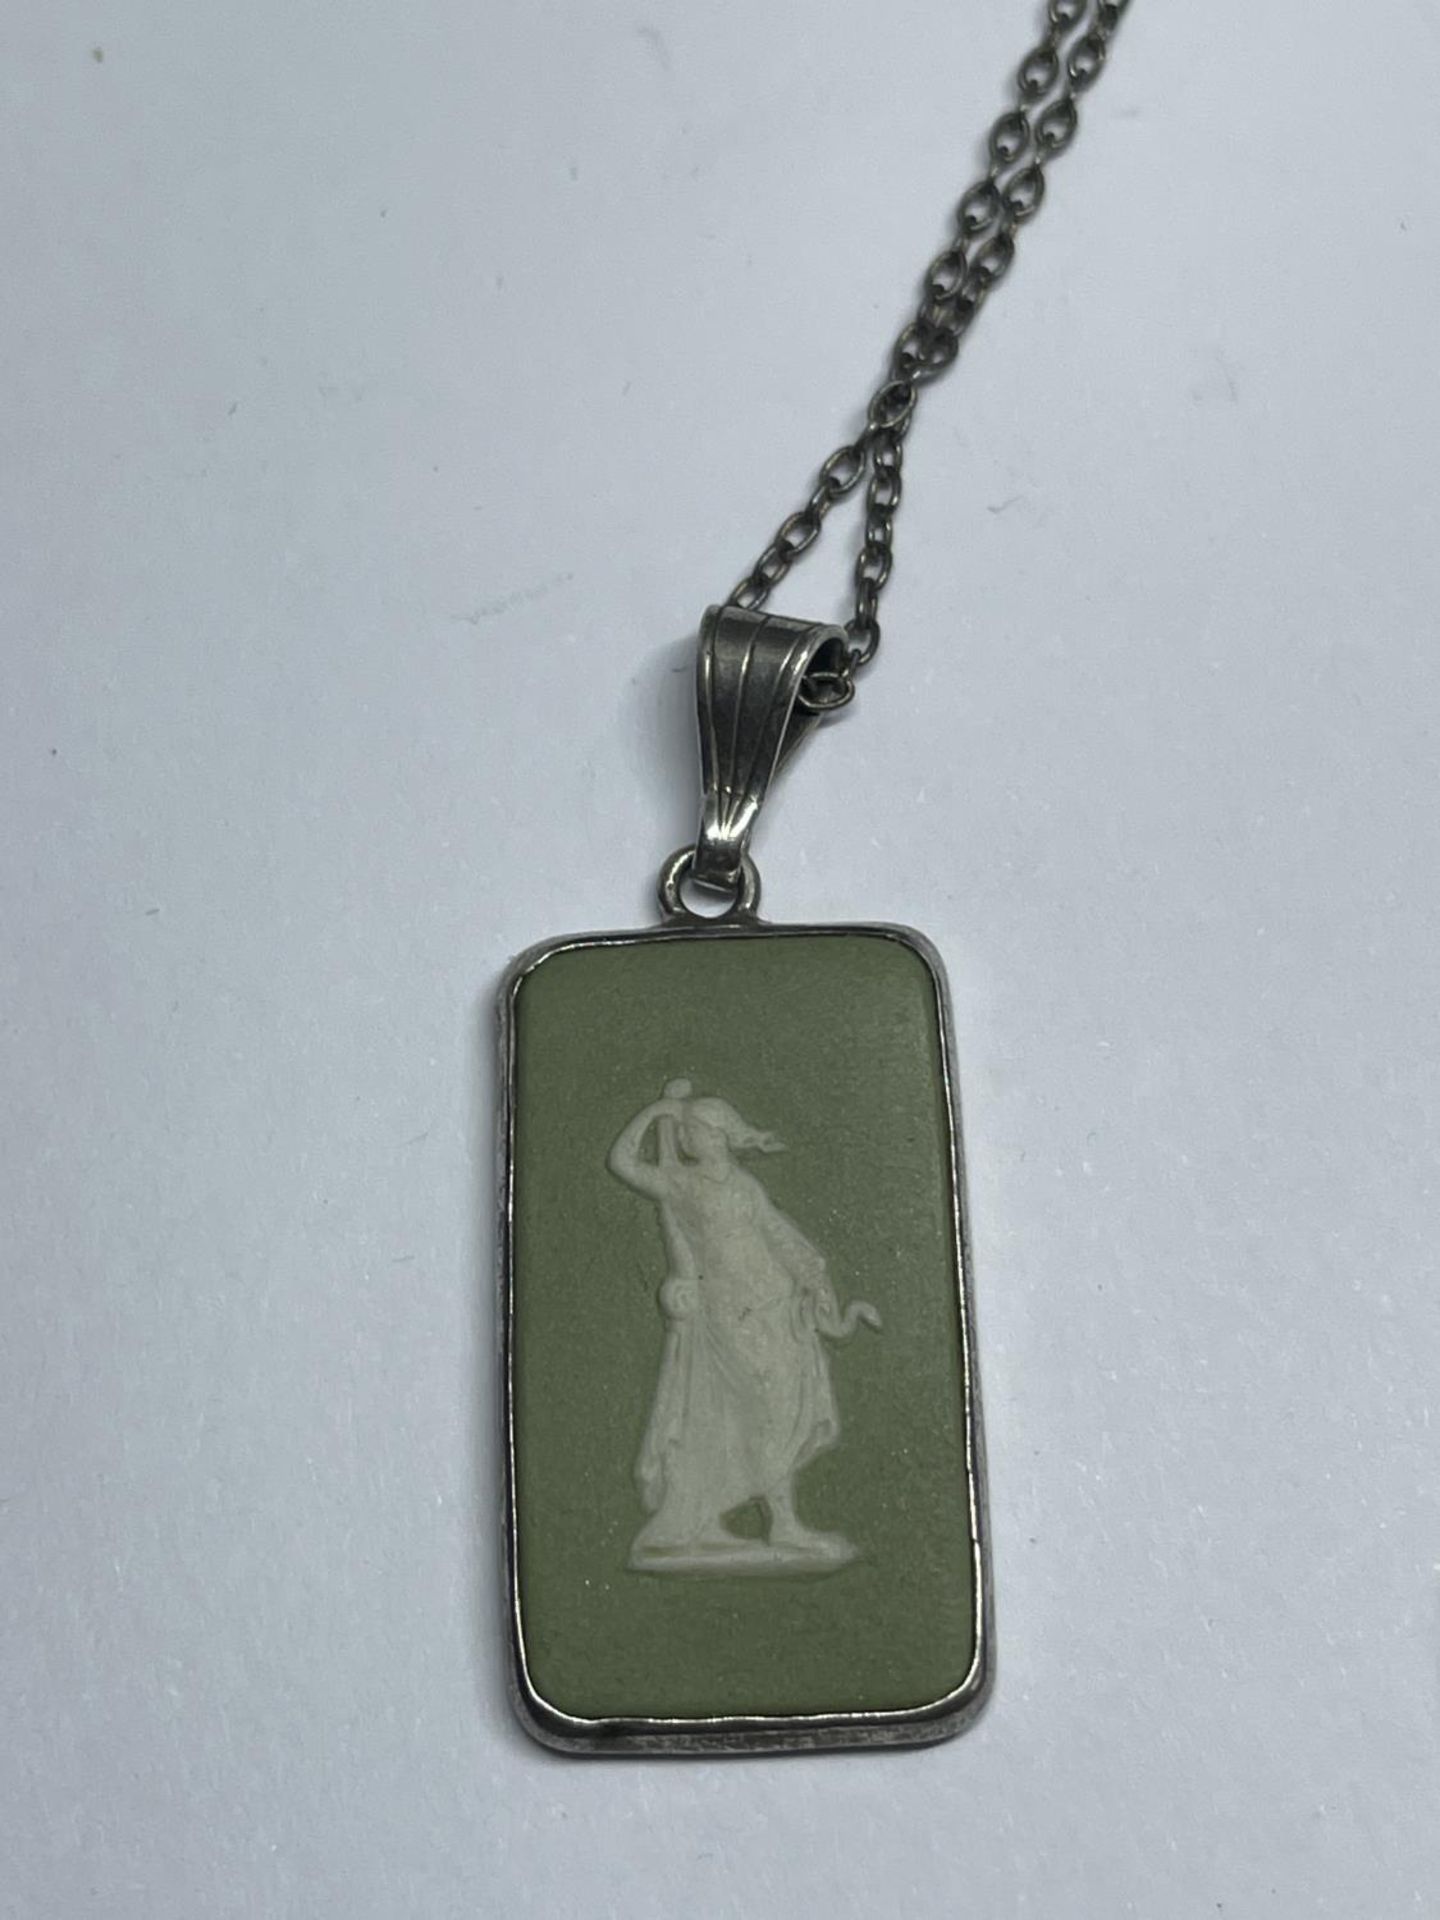 TWO WEDGWOOD JASPERWARE ITEMS TO INCLUDE A BLUE BROOCH AND A NECKLACE WITH GREEN PENDANT - Image 2 of 3